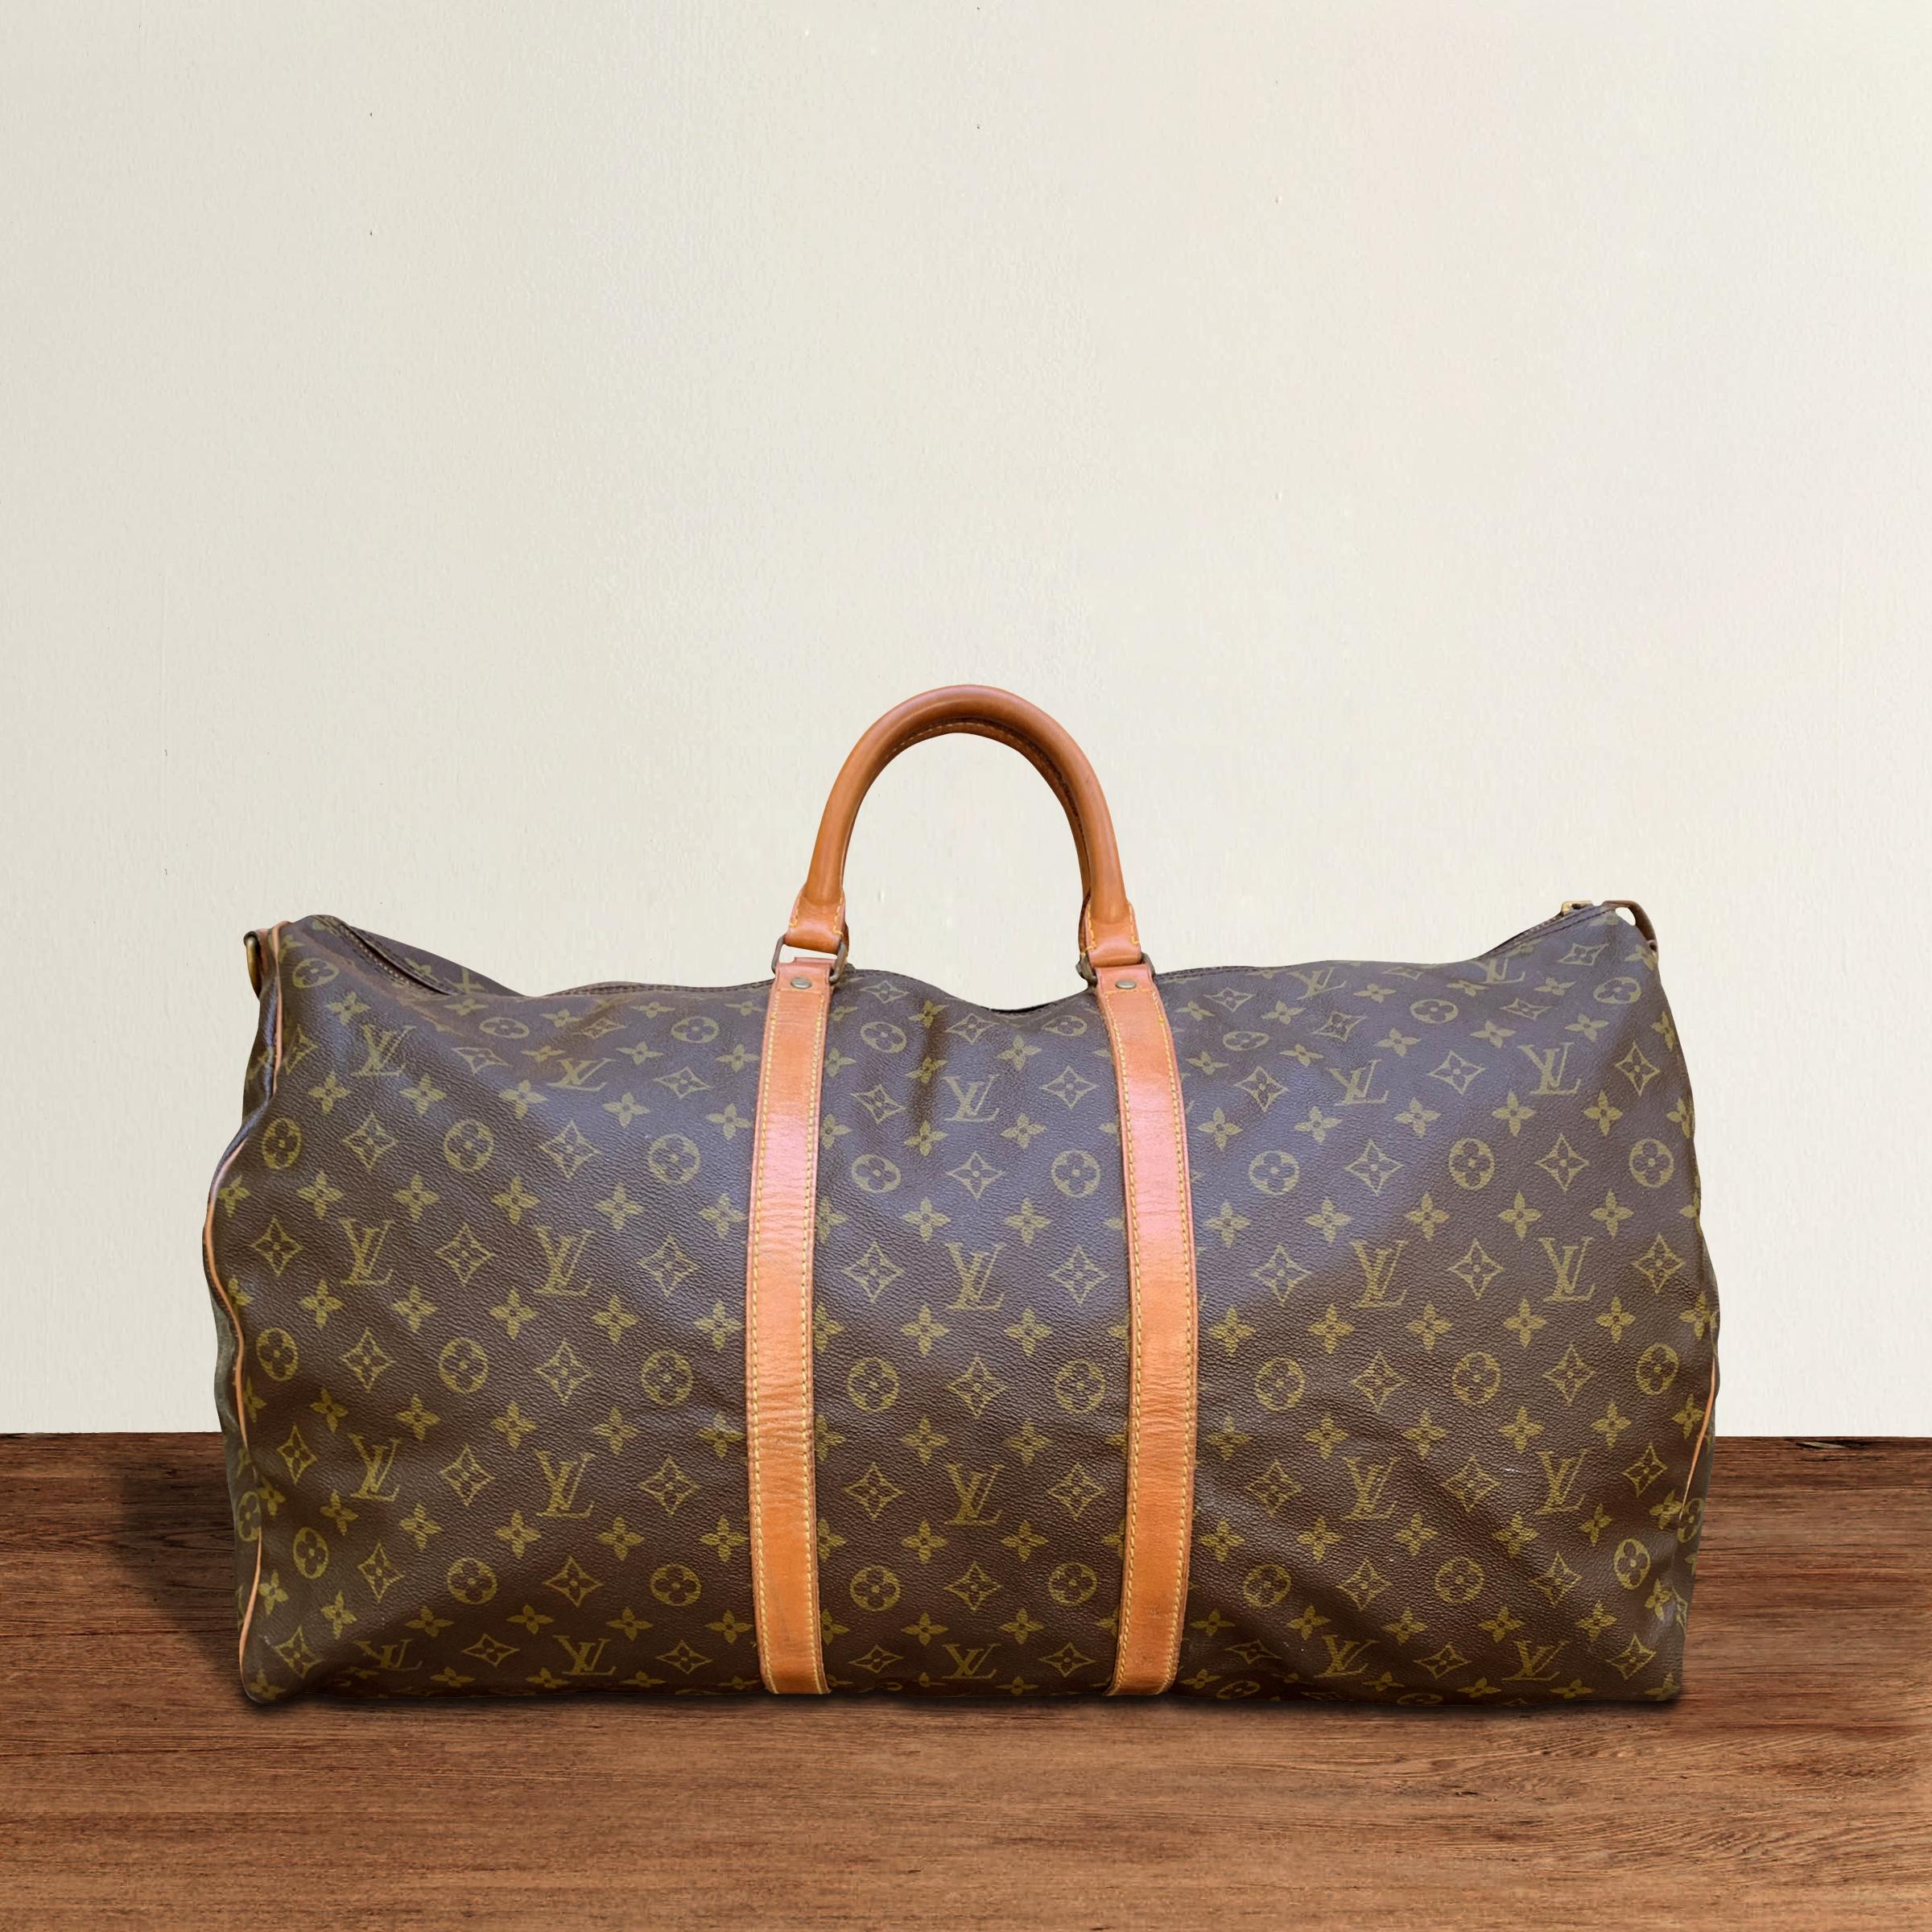 A vintage Louis Vuitton duffle bag made using the classic 